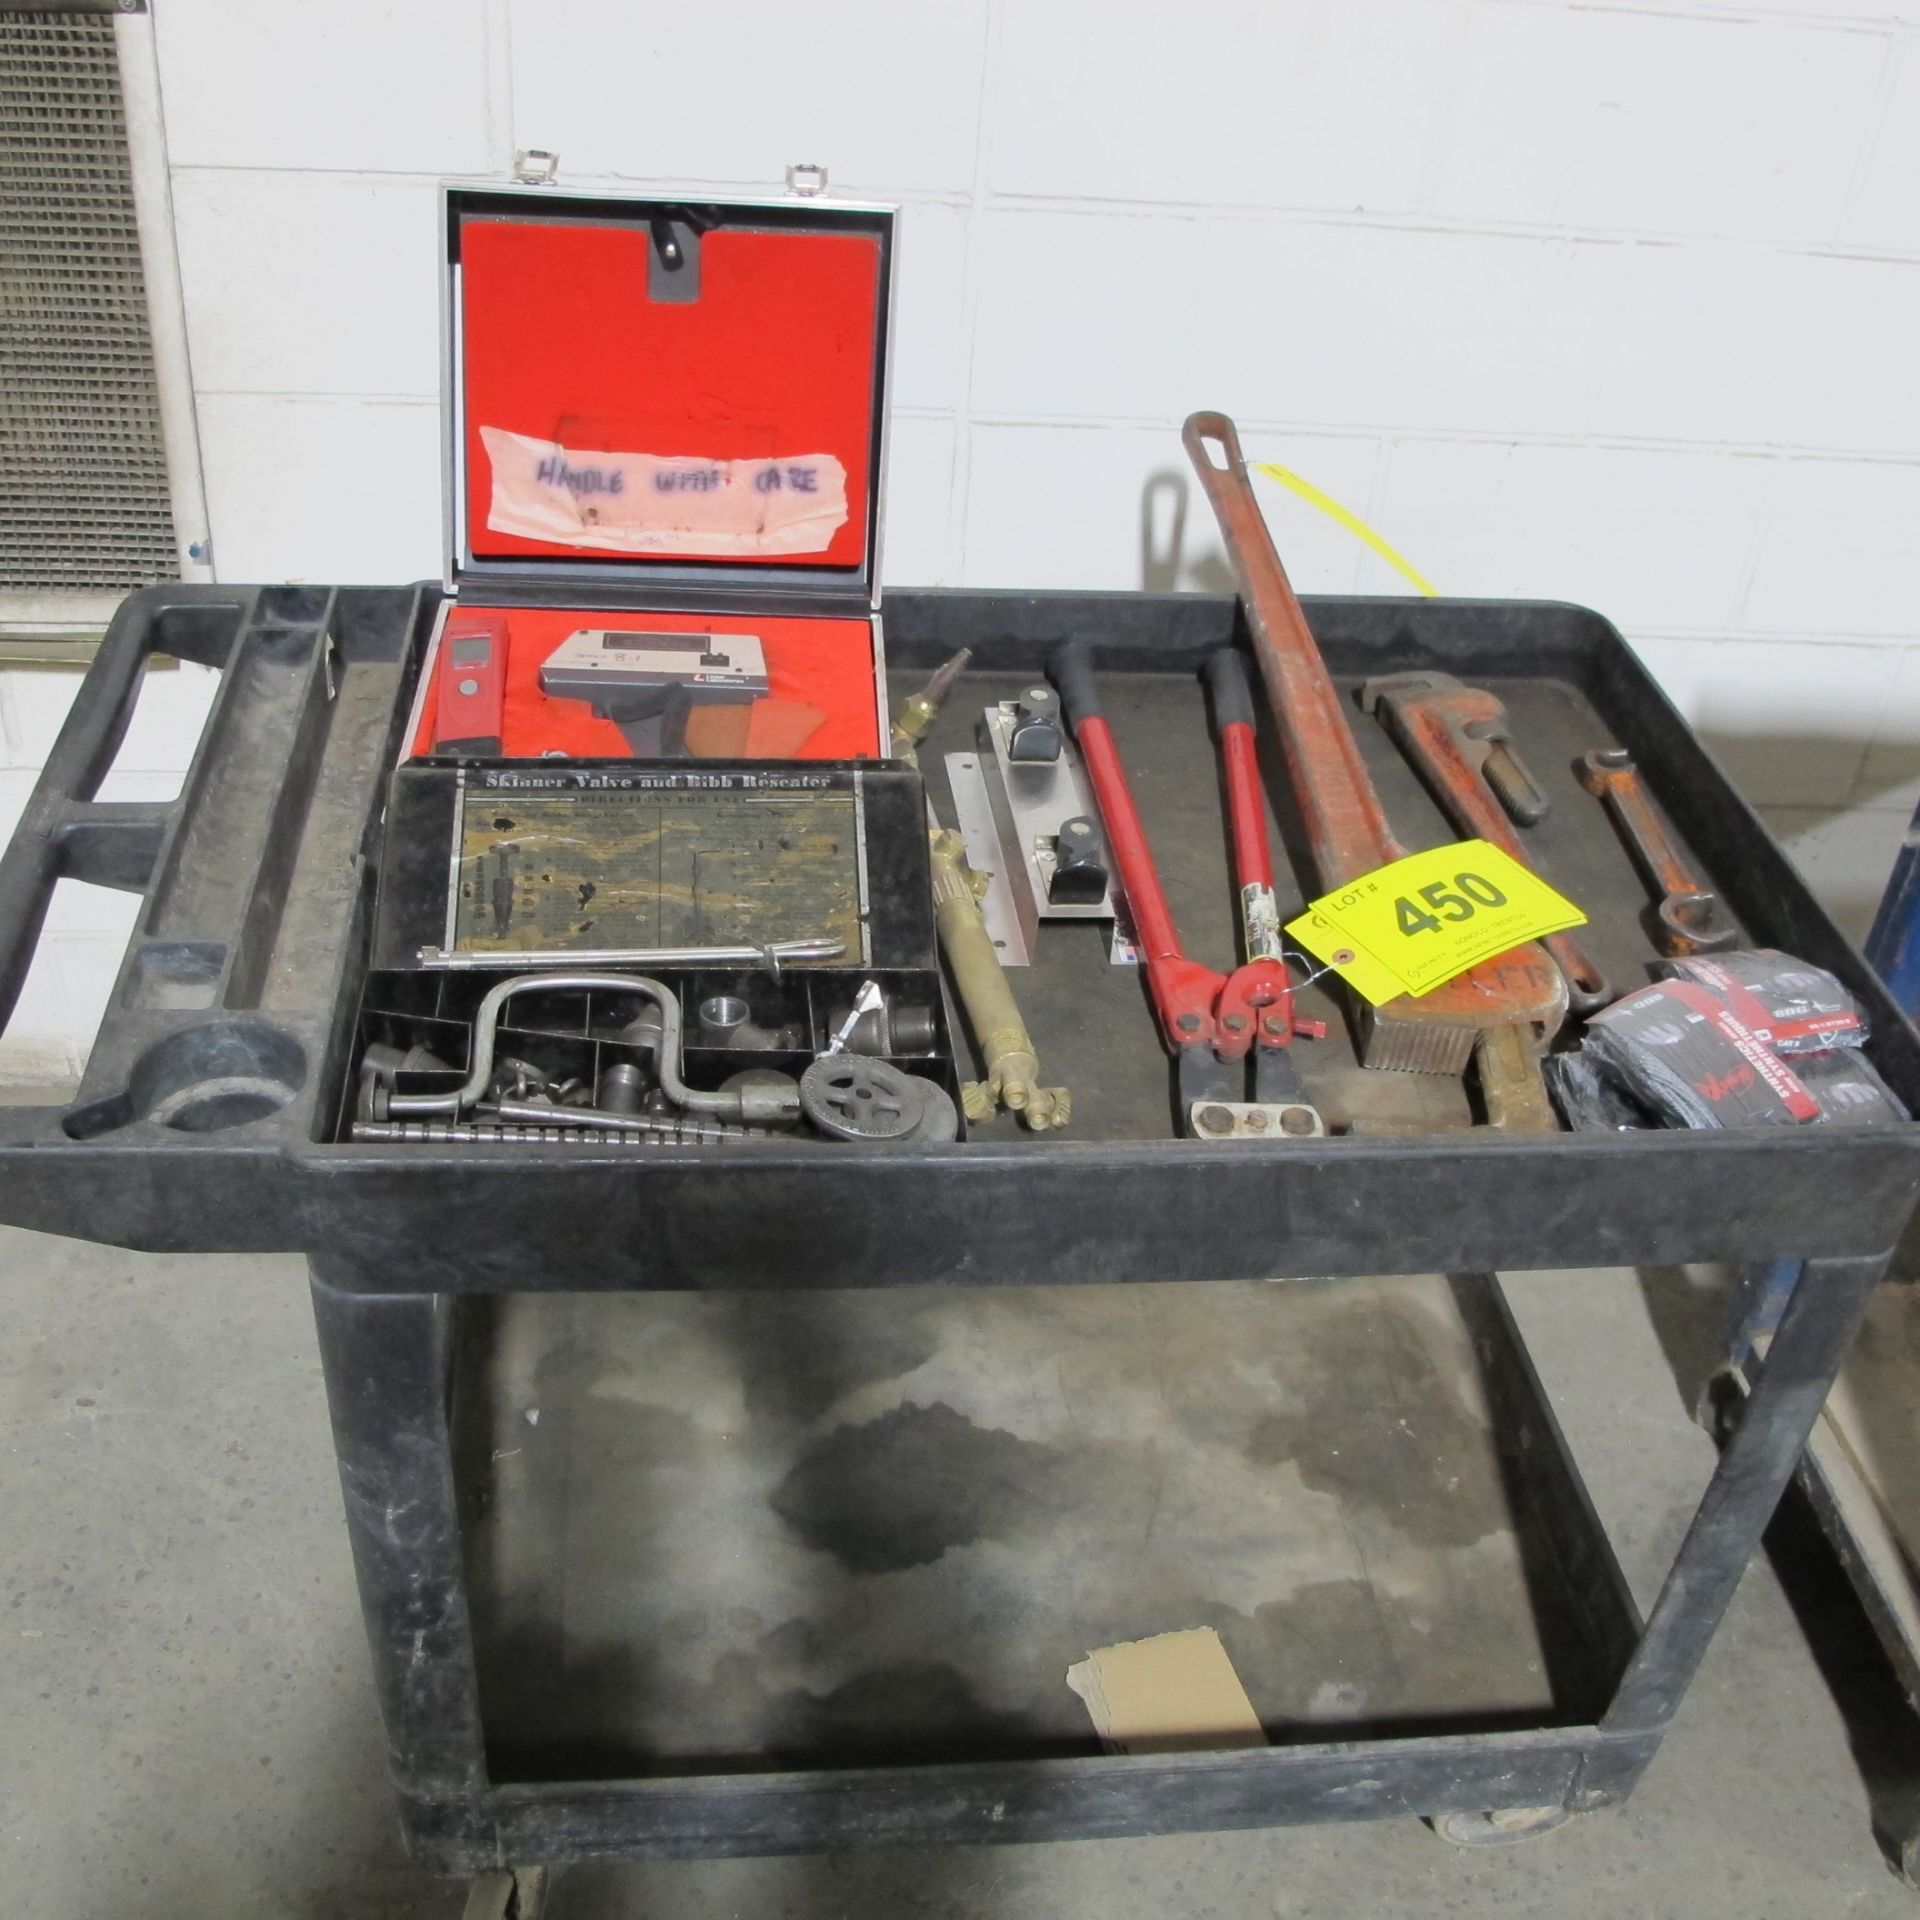 PLASTIC SHOP CART W/ LINEAR LAB ROTORIES DIGITAL THERMOMETER, PIPE WRENCHES, BOLT CUTTERS, TORCH,